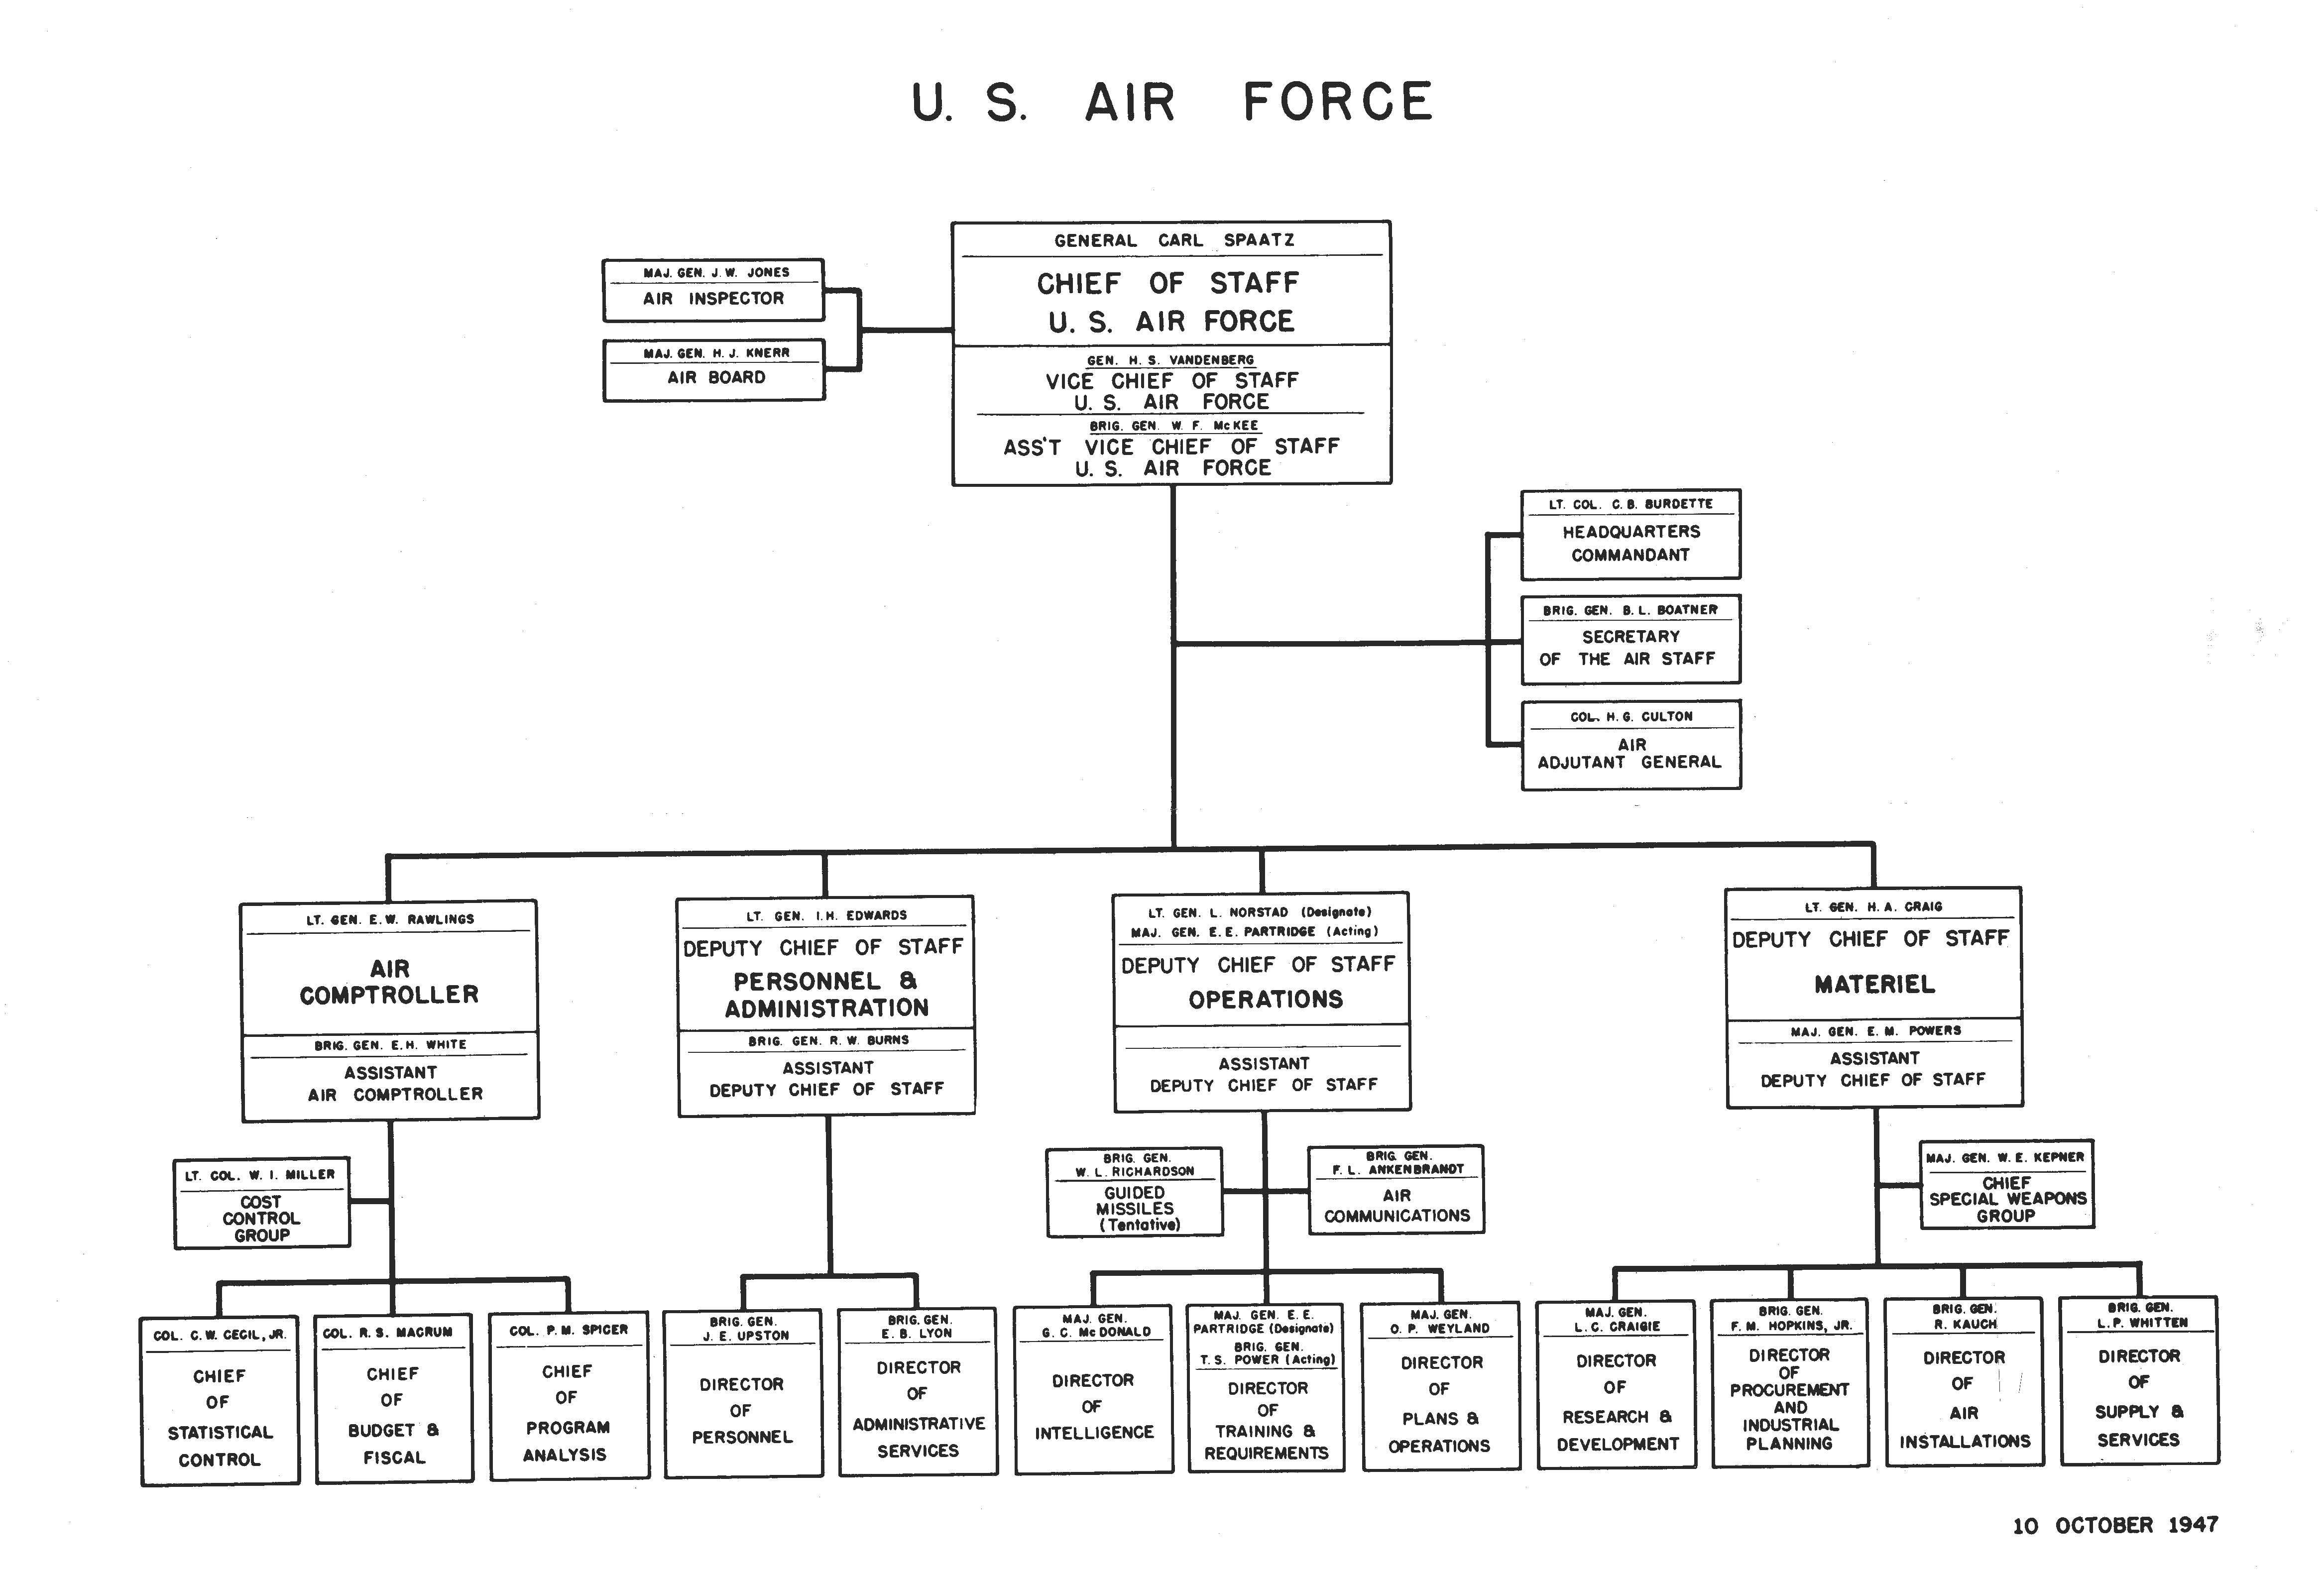 2011 HQ Department of the Air Force Organization Chart